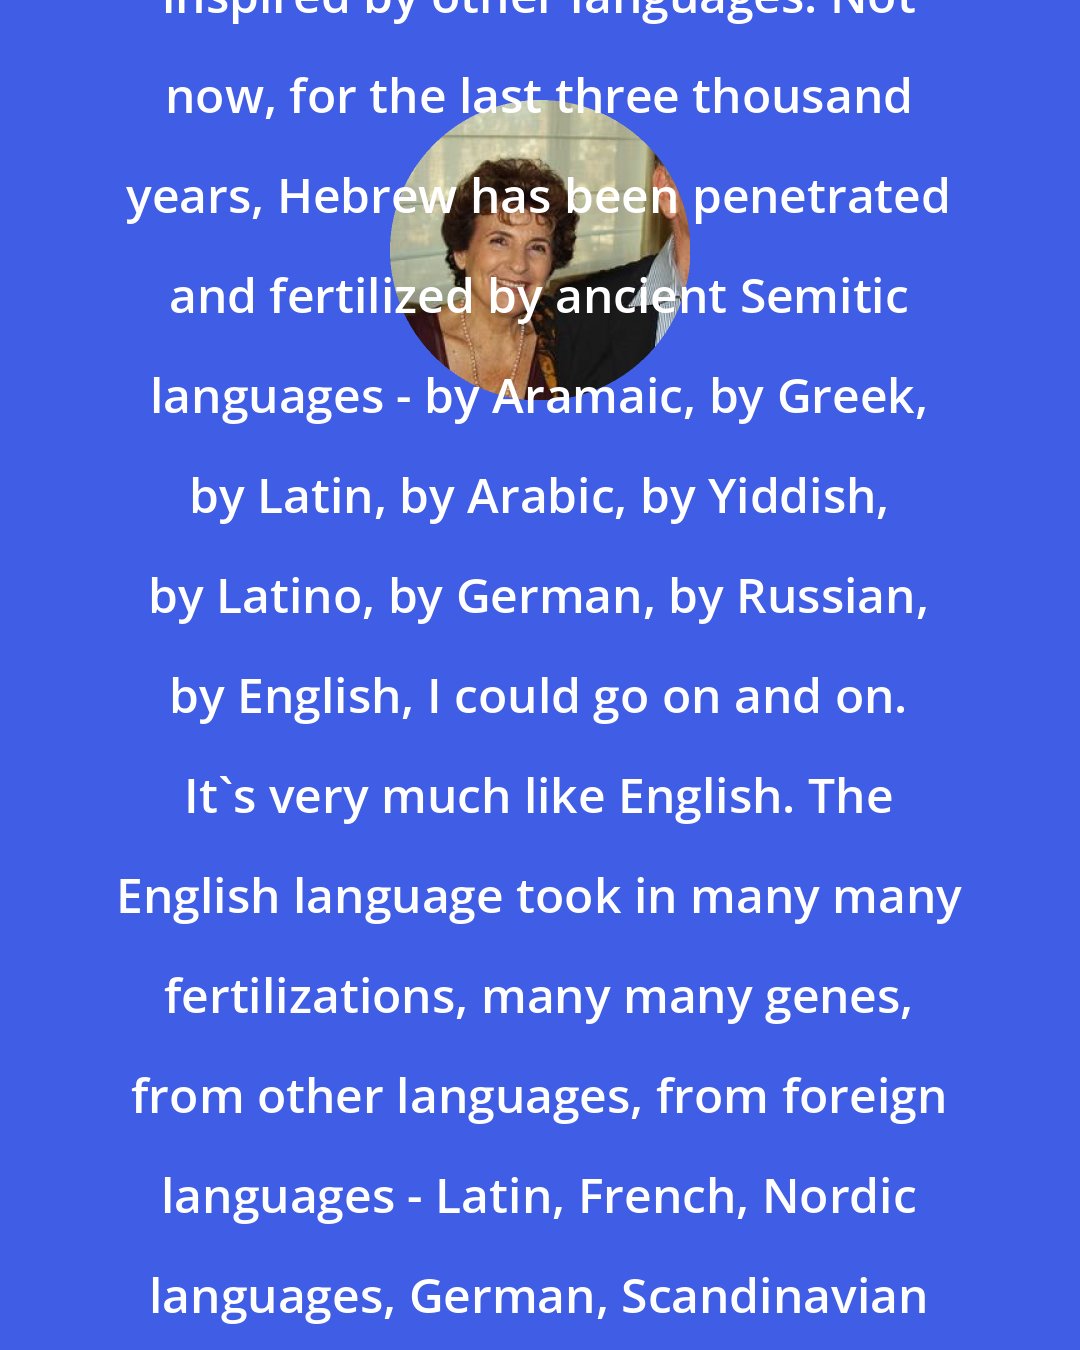 Amos Oz: I work in Hebrew. Hebrew is deeply inspired by other languages. Not now, for the last three thousand years, Hebrew has been penetrated and fertilized by ancient Semitic languages - by Aramaic, by Greek, by Latin, by Arabic, by Yiddish, by Latino, by German, by Russian, by English, I could go on and on. It's very much like English. The English language took in many many fertilizations, many many genes, from other languages, from foreign languages - Latin, French, Nordic languages, German, Scandinavian languages. Every language has influences and is an influence.